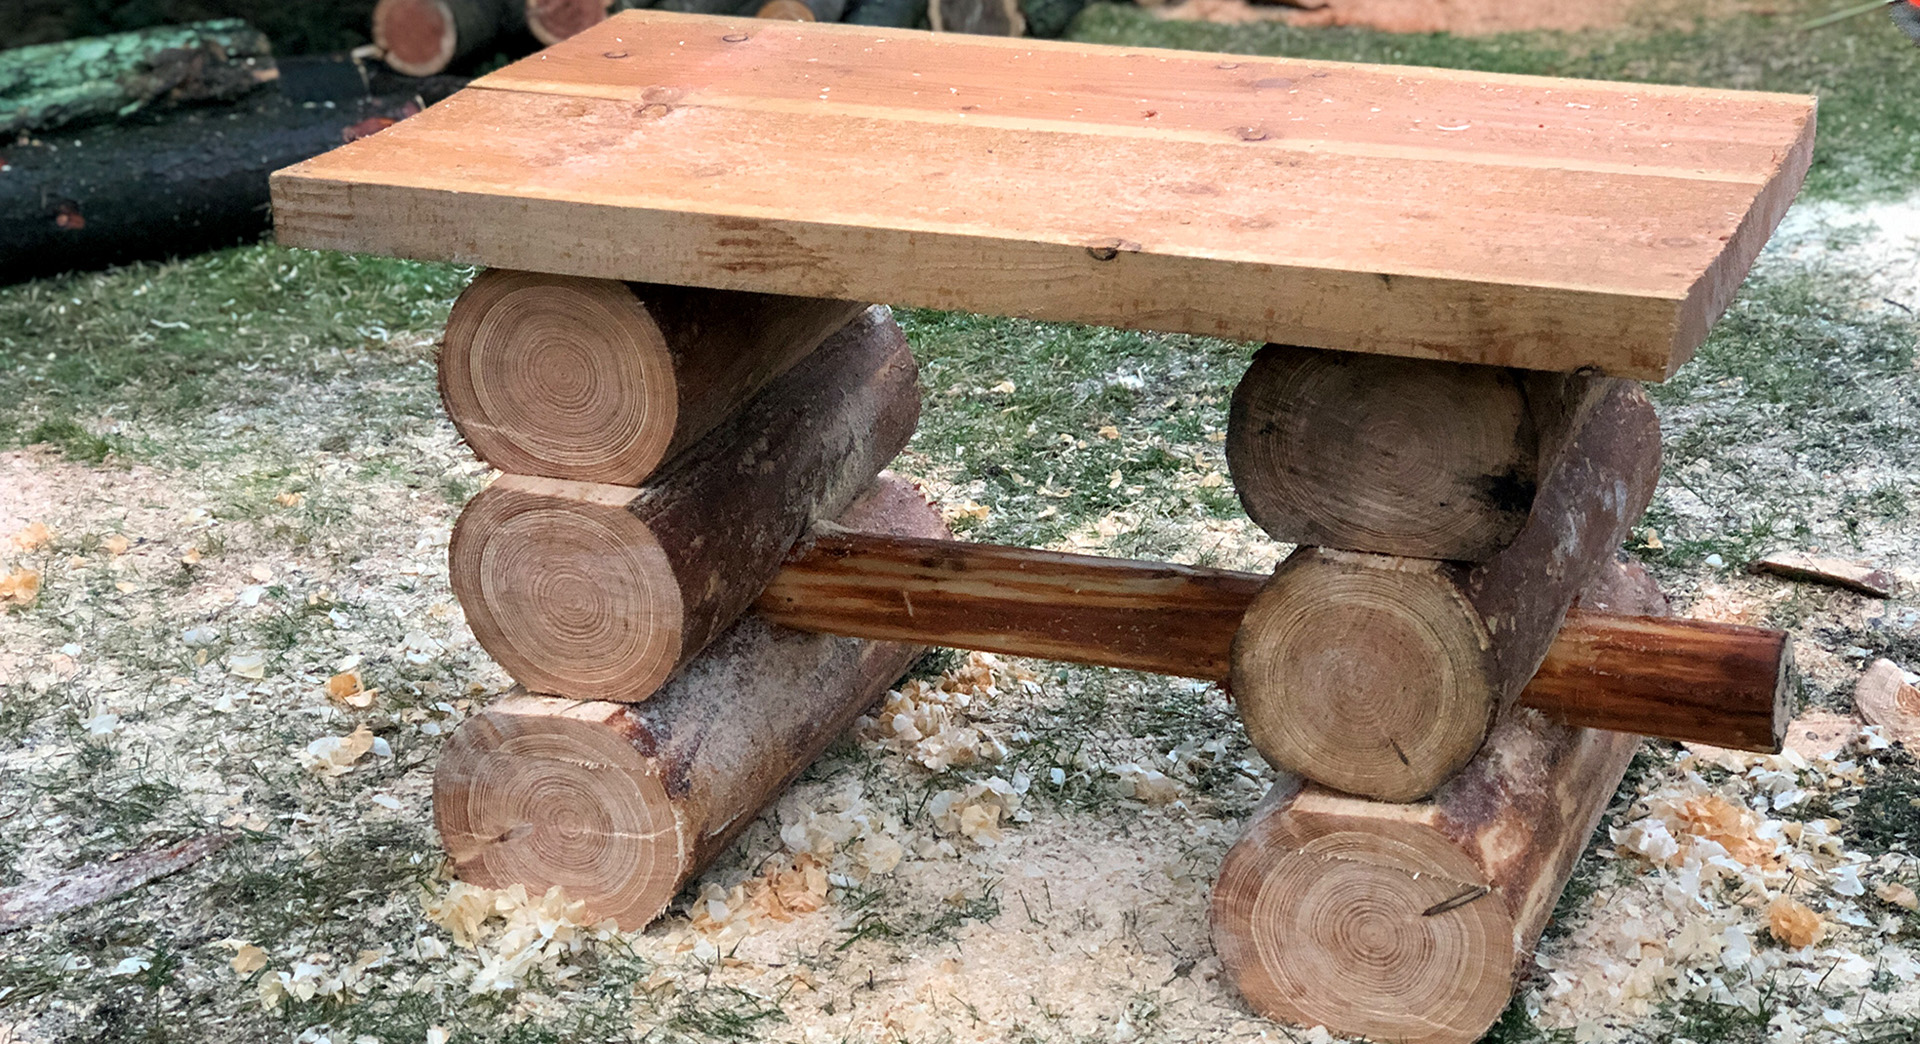 A finished wooden garden table on a lawn, surrounded by sawdust